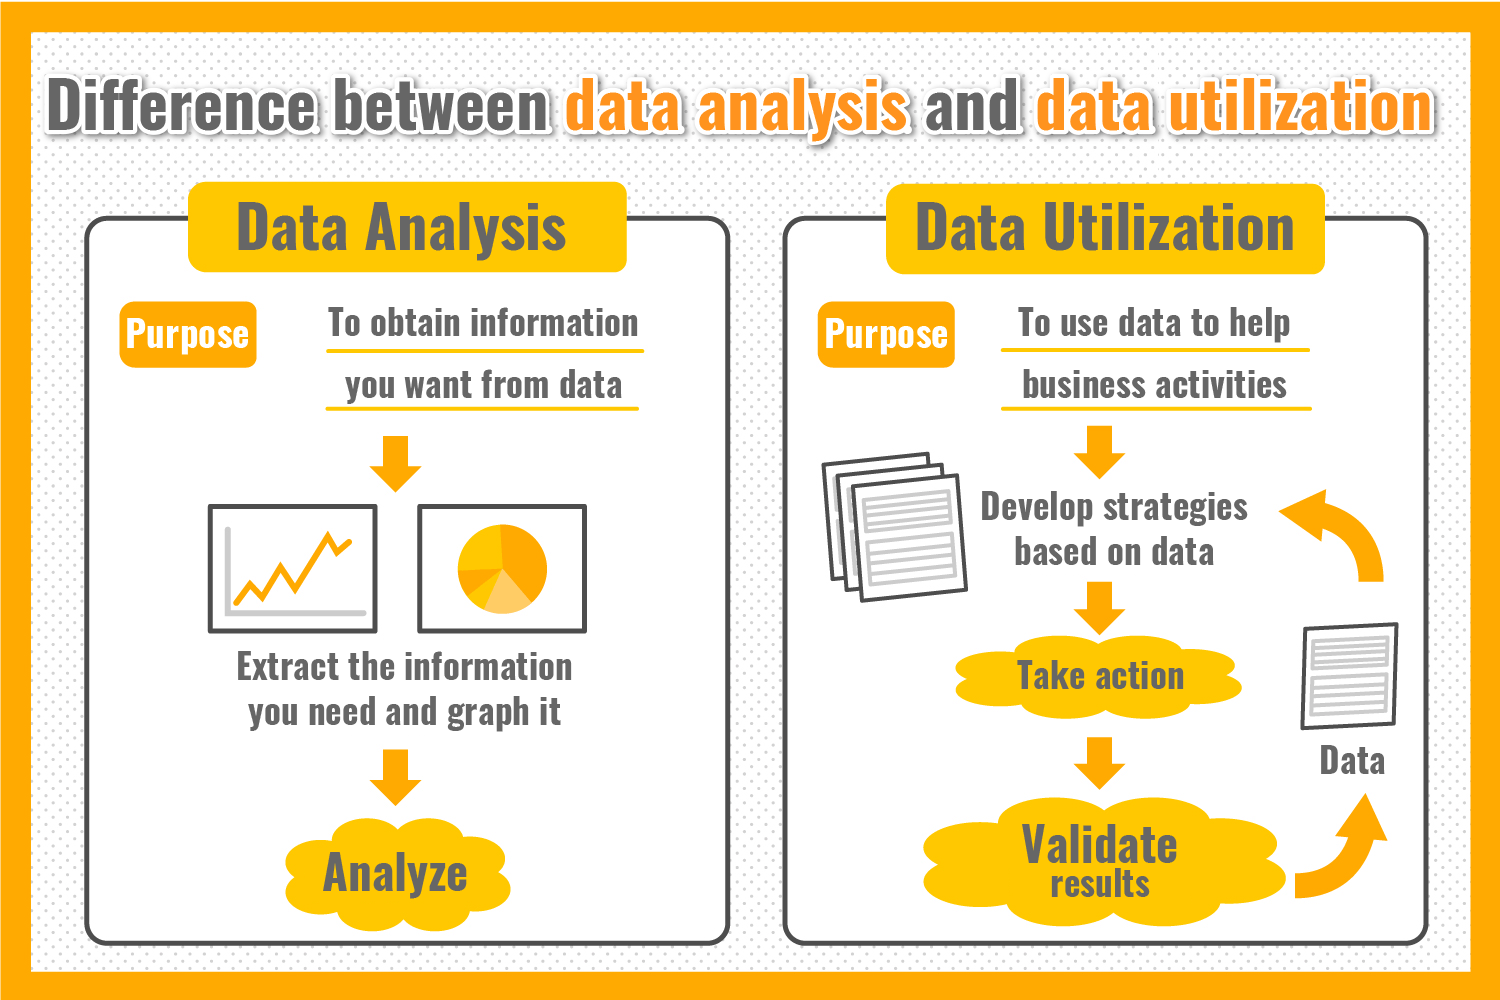 Difference between data analysis and data utilization